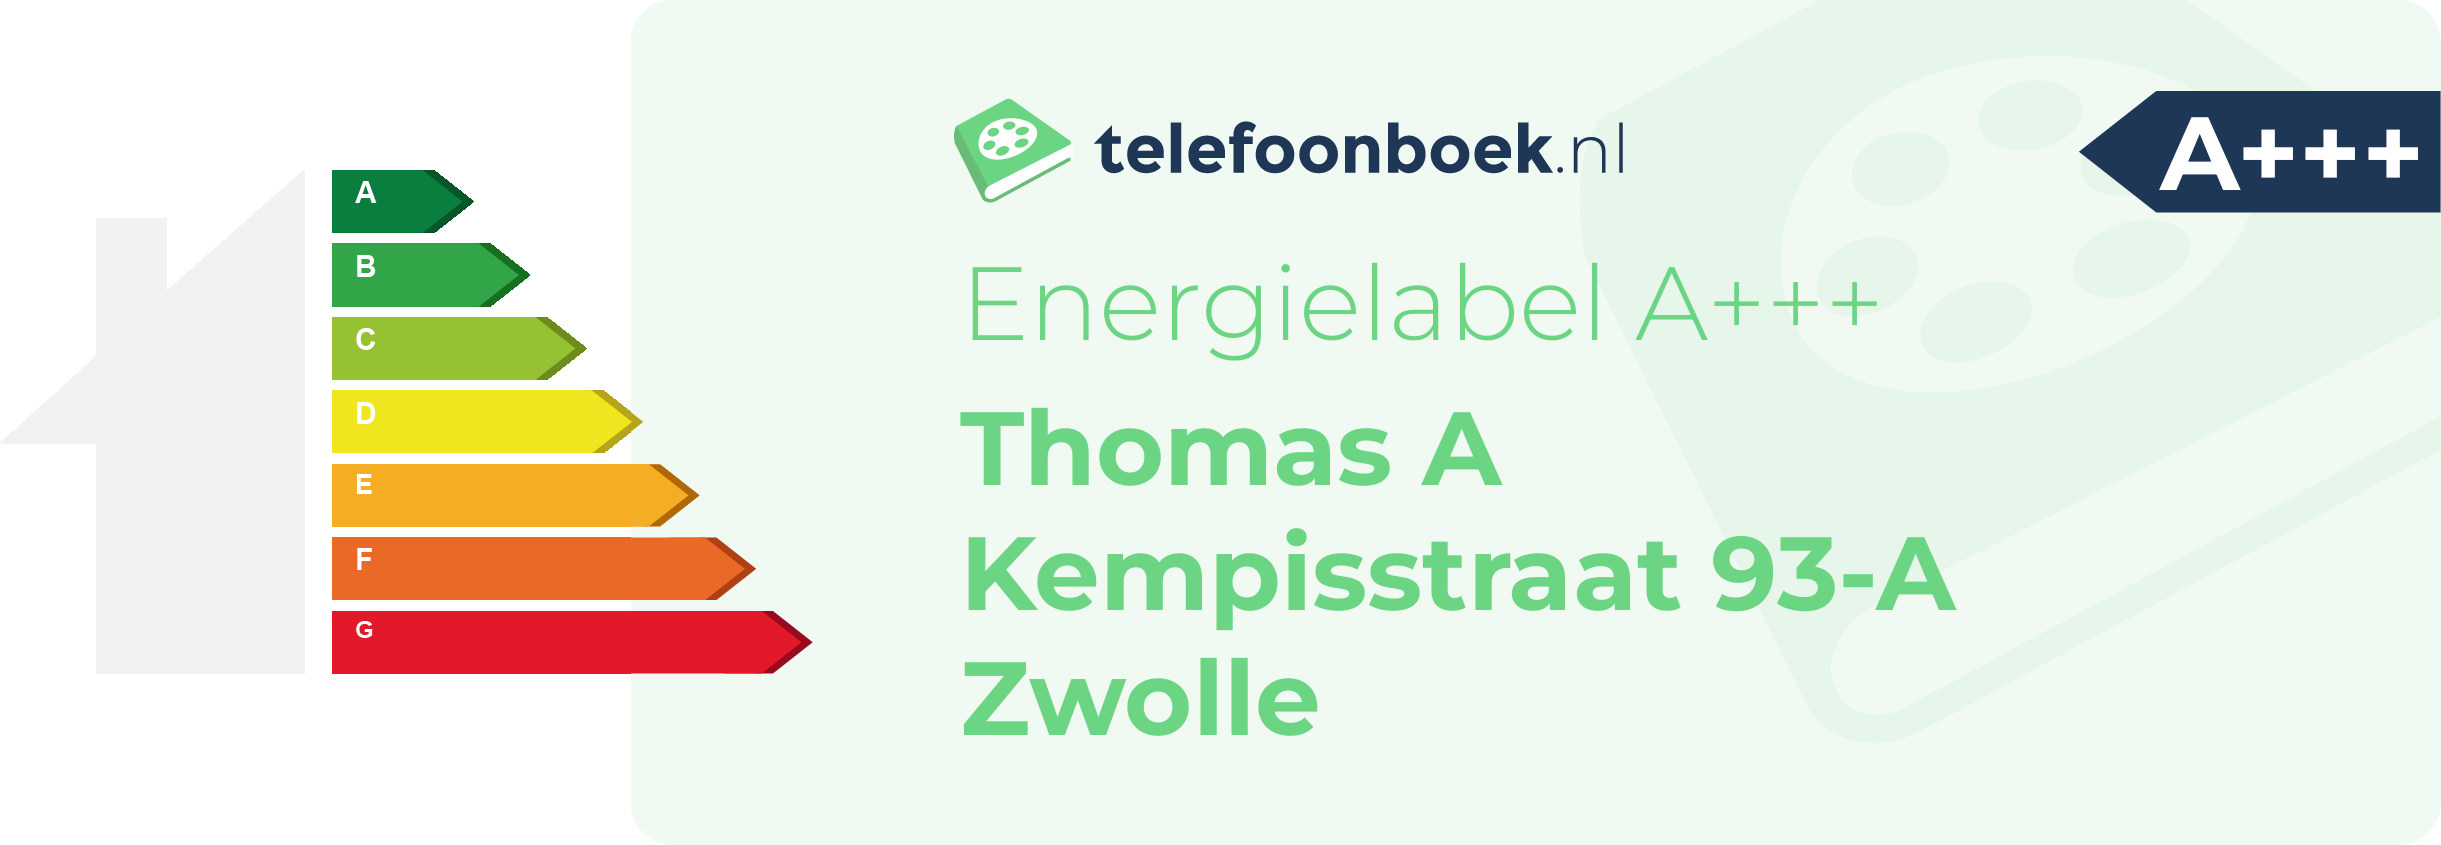 Energielabel Thomas A Kempisstraat 93-A Zwolle